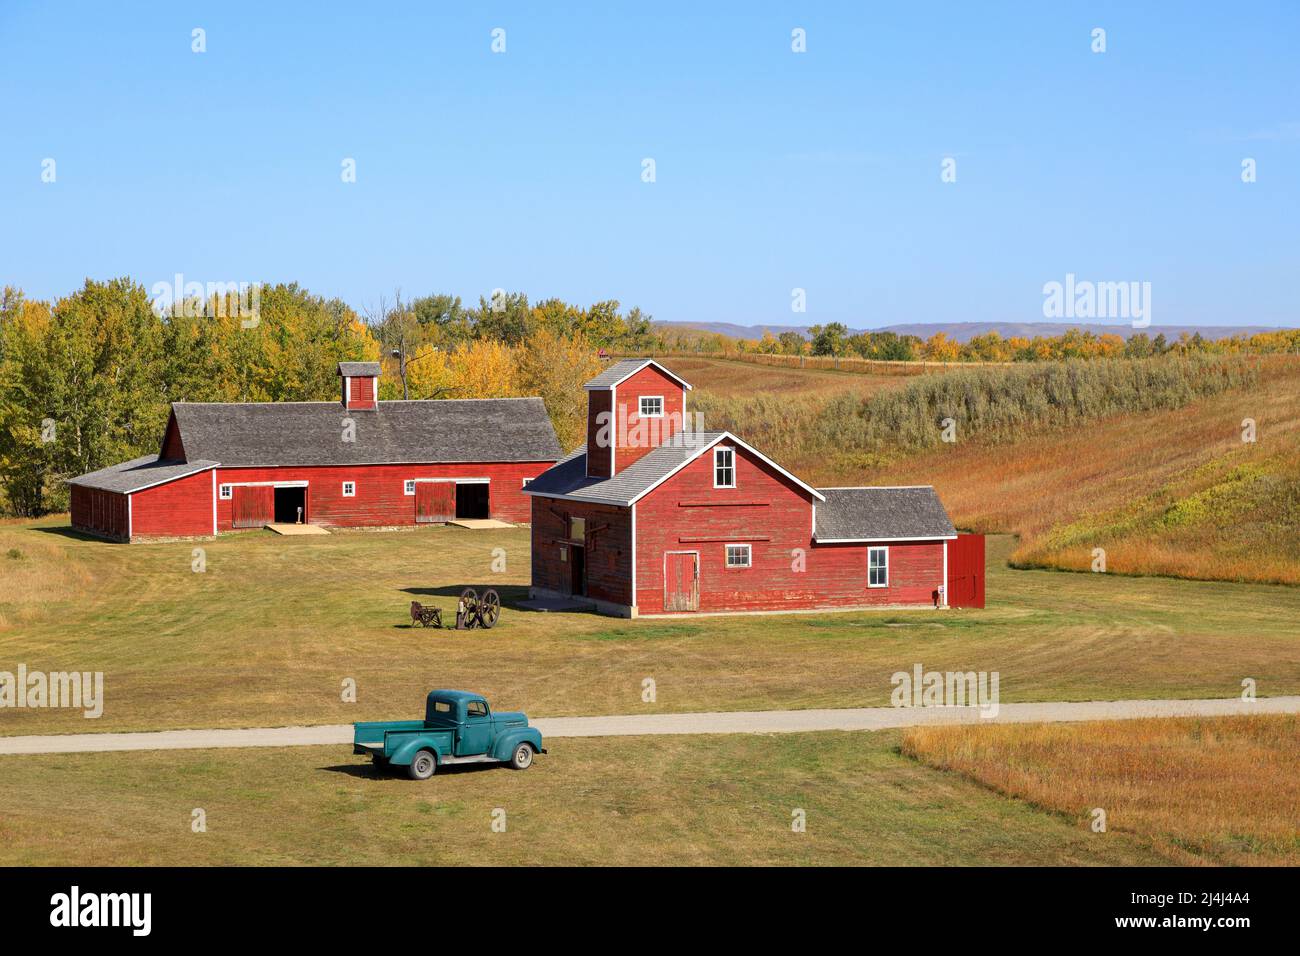 The Bar U Ranch National Historic Site, located near Longview, Alberta, is a preserved ranch that for 70 years was one of the leading ranching operati Stock Photo